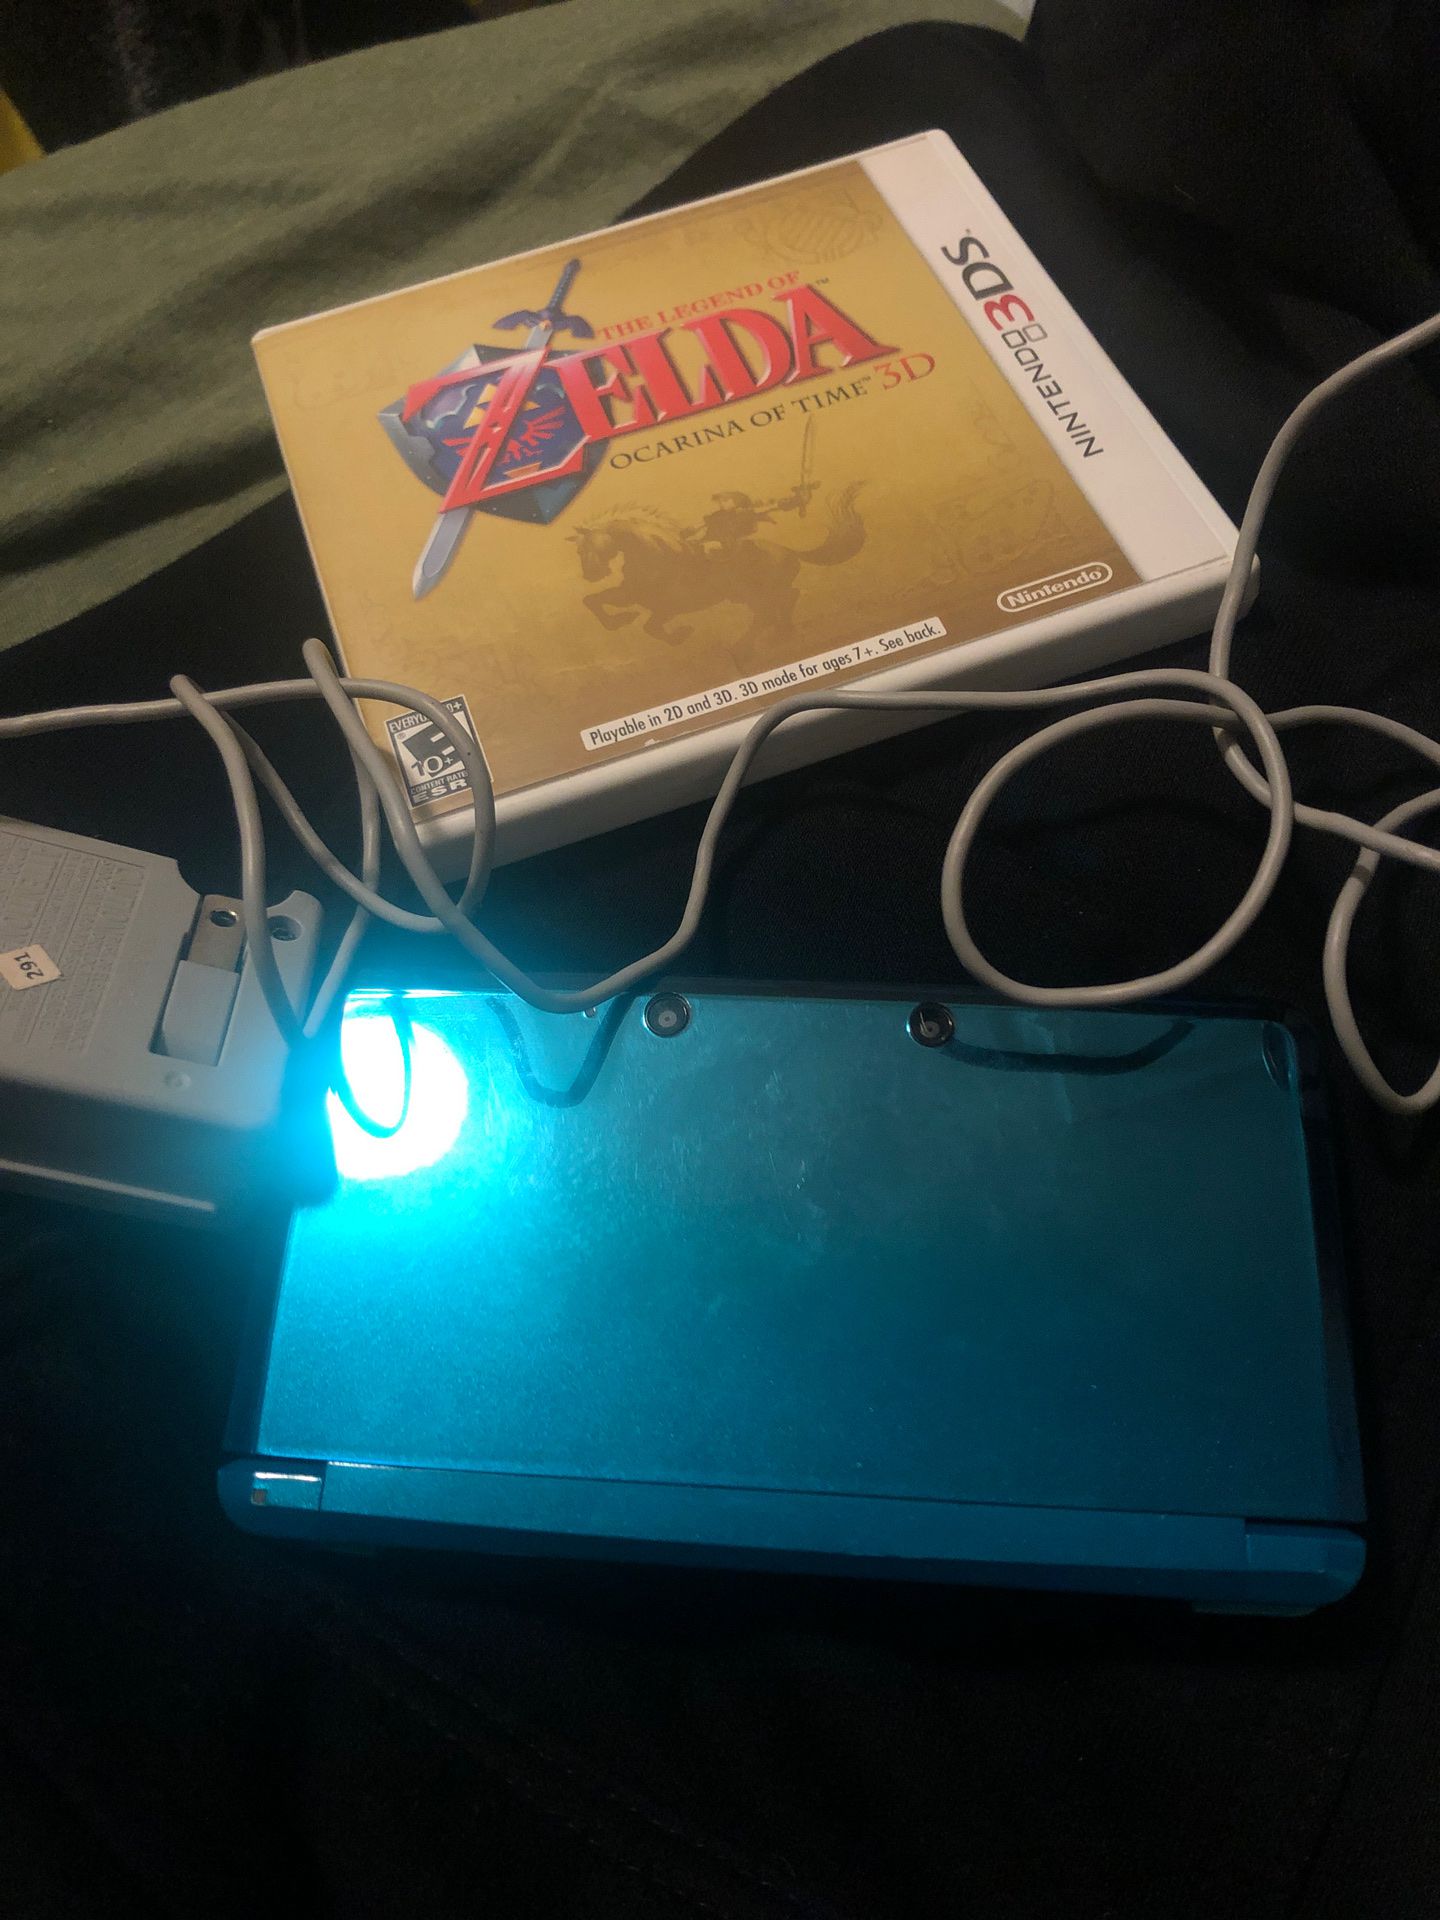 Nintendo 3ds with game